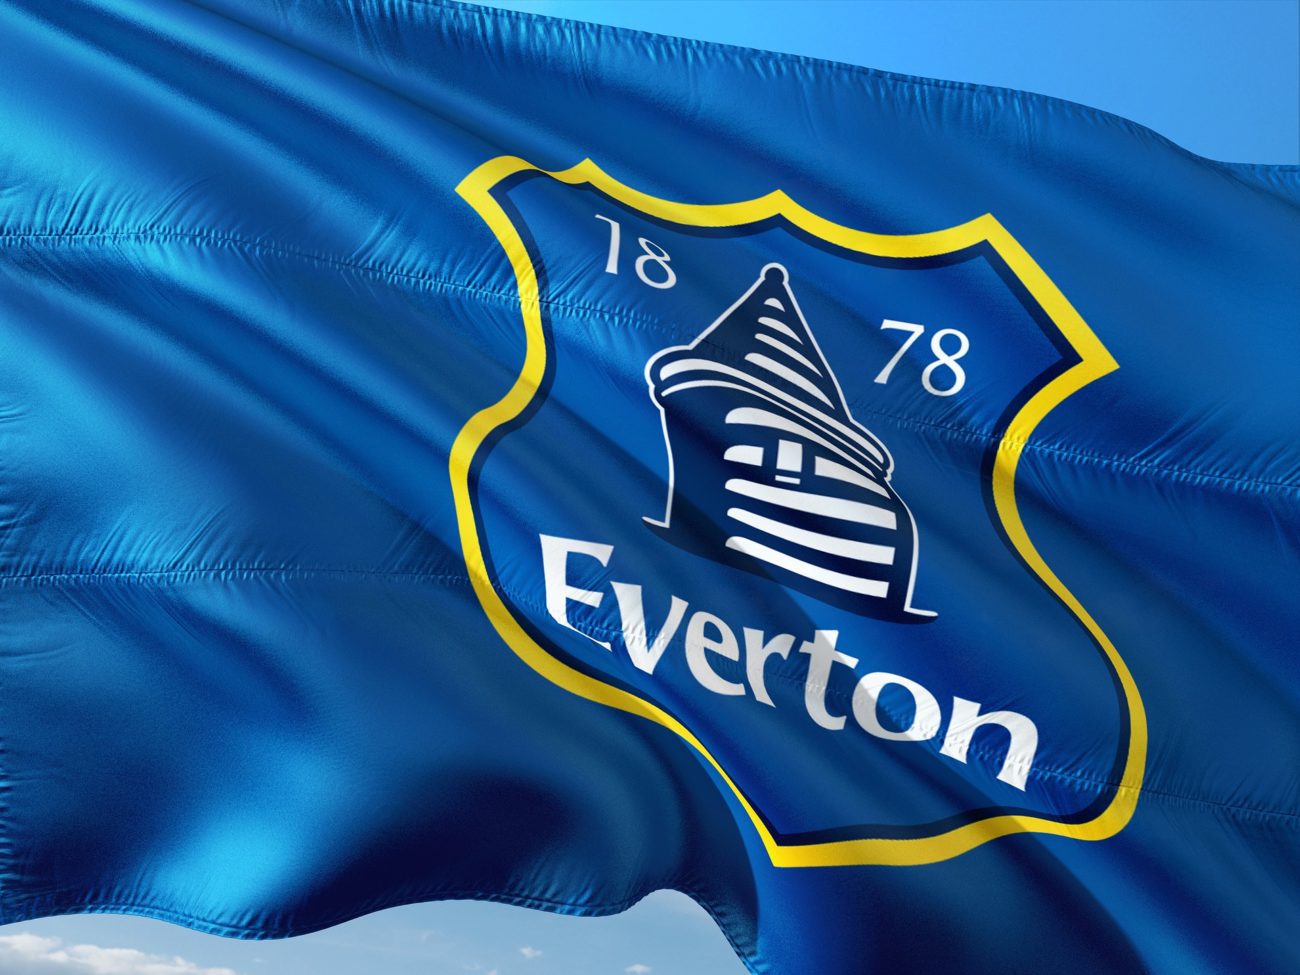 Everton announced betting partnership with i8.Bet